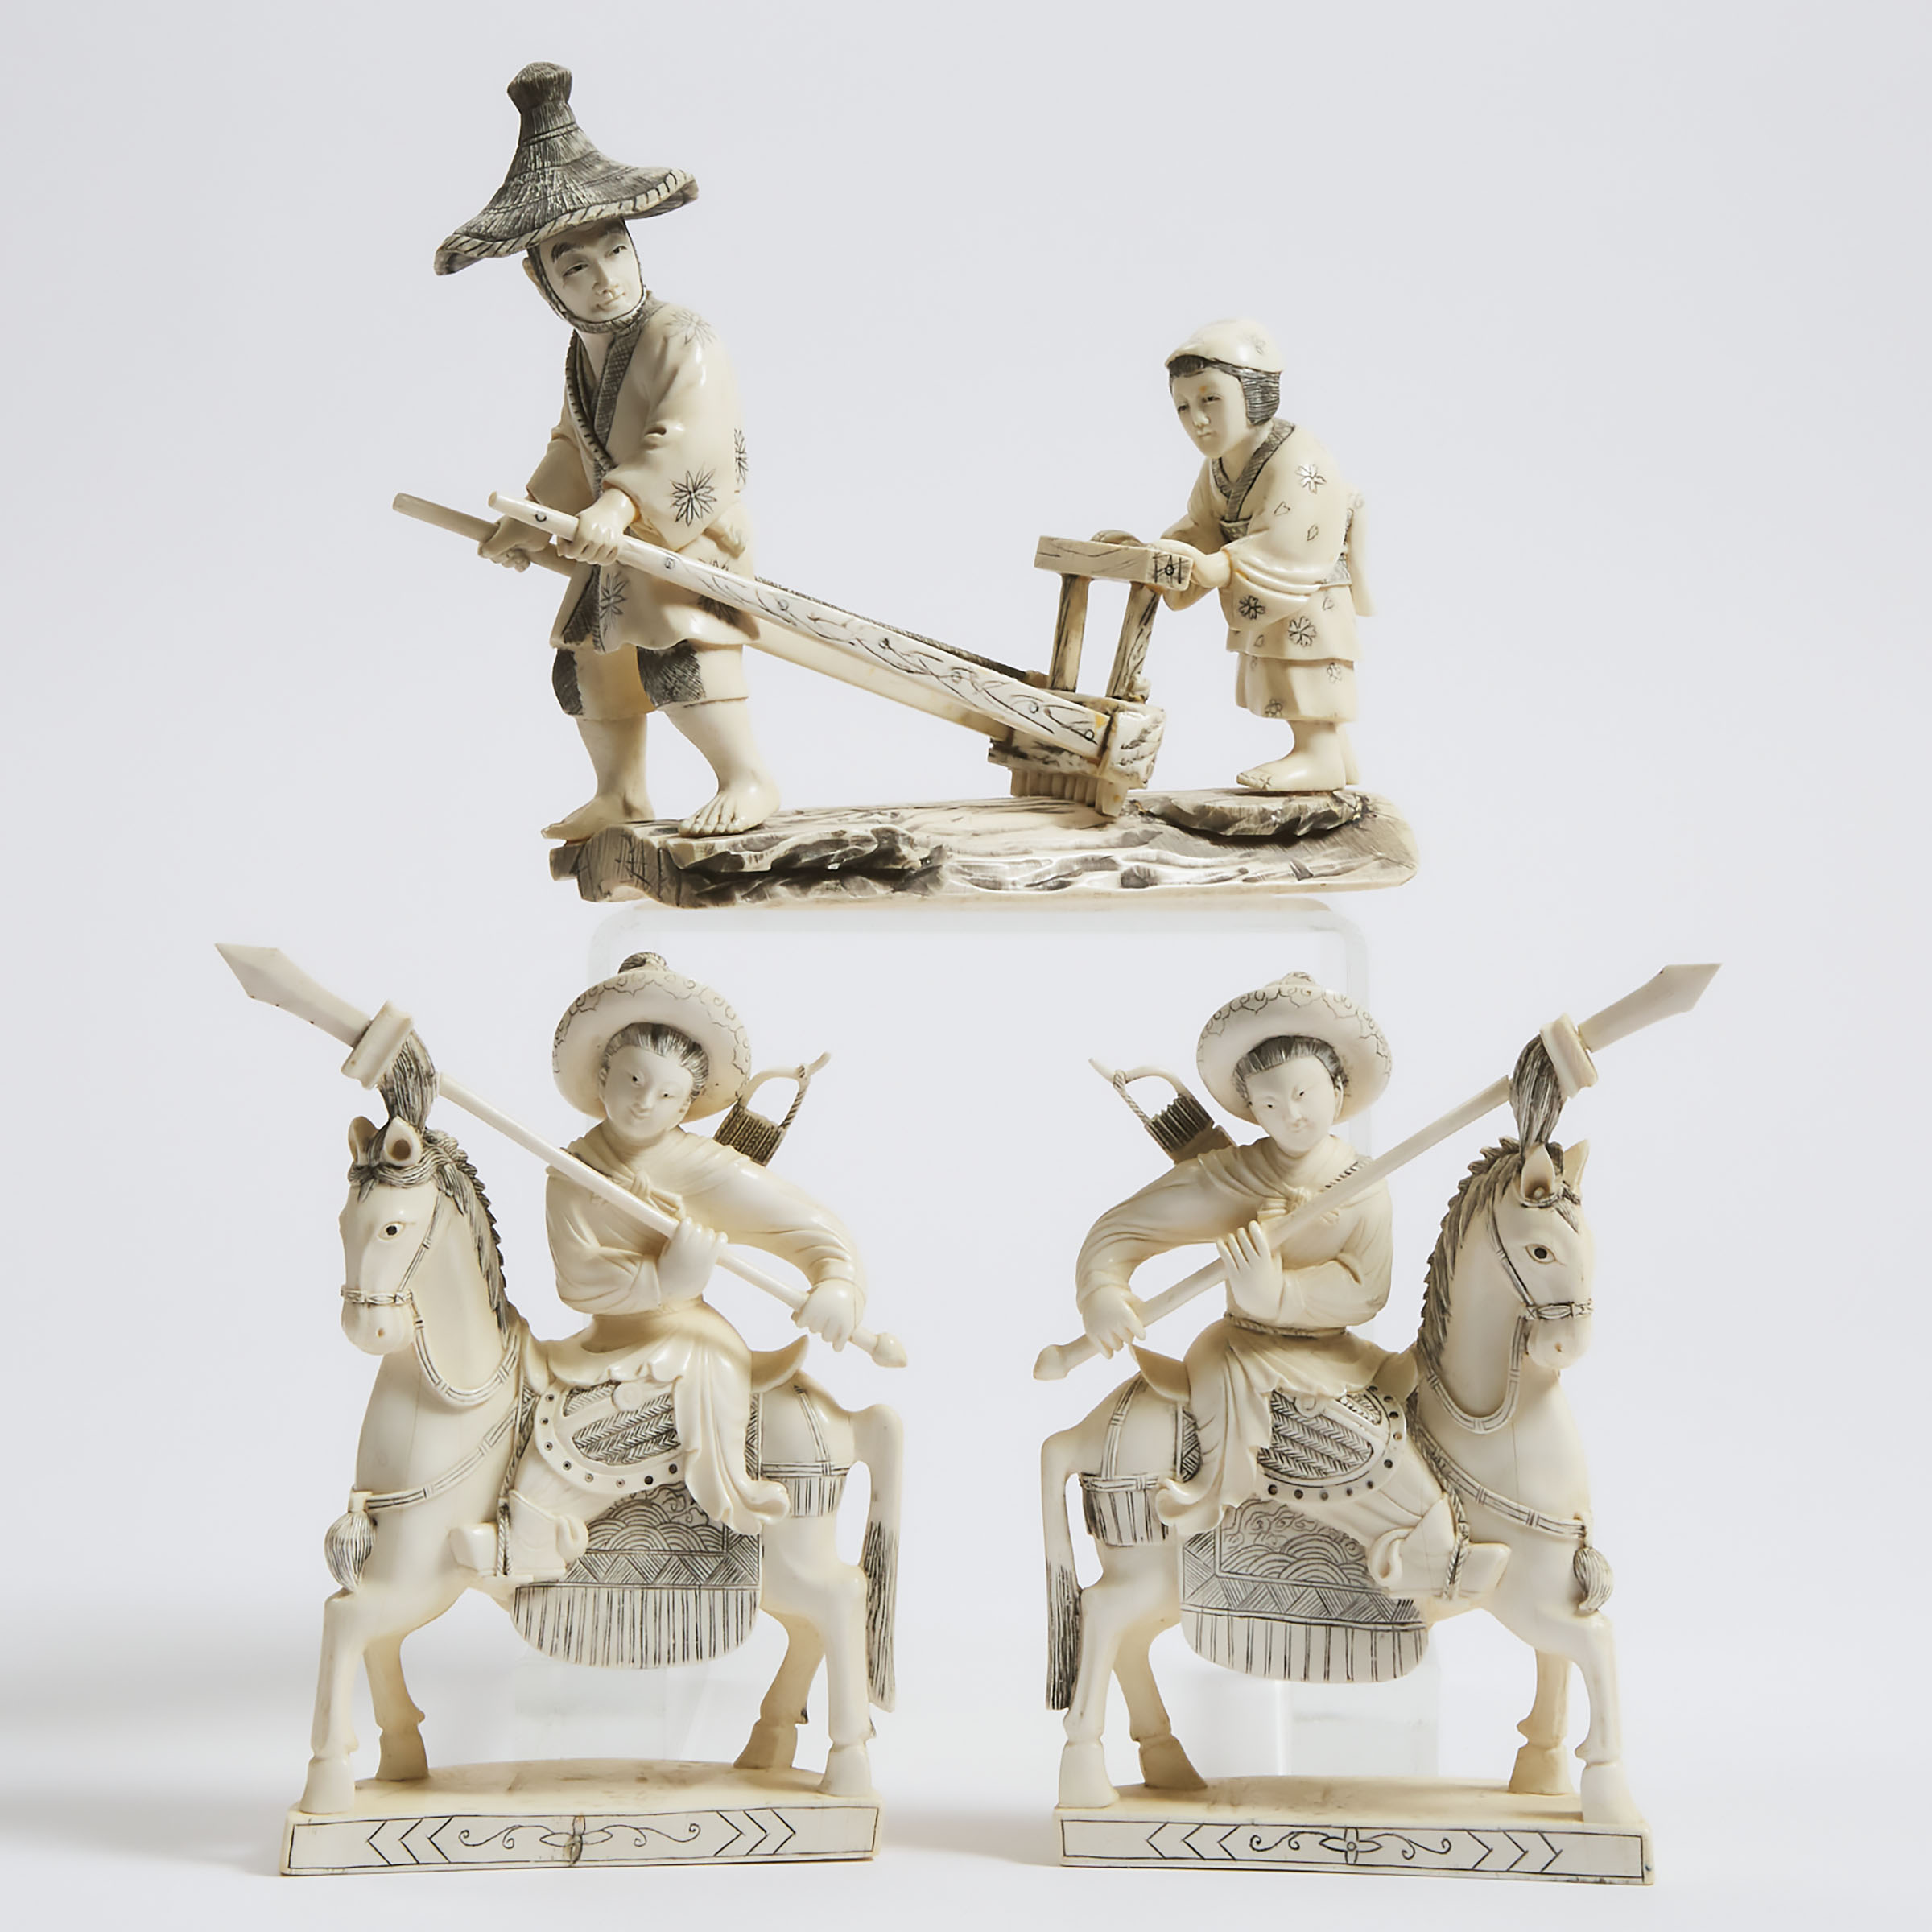 A Pair of Ivory Warriors on Horseback, Together With an Ivory Farming Group, Mid 20th Century